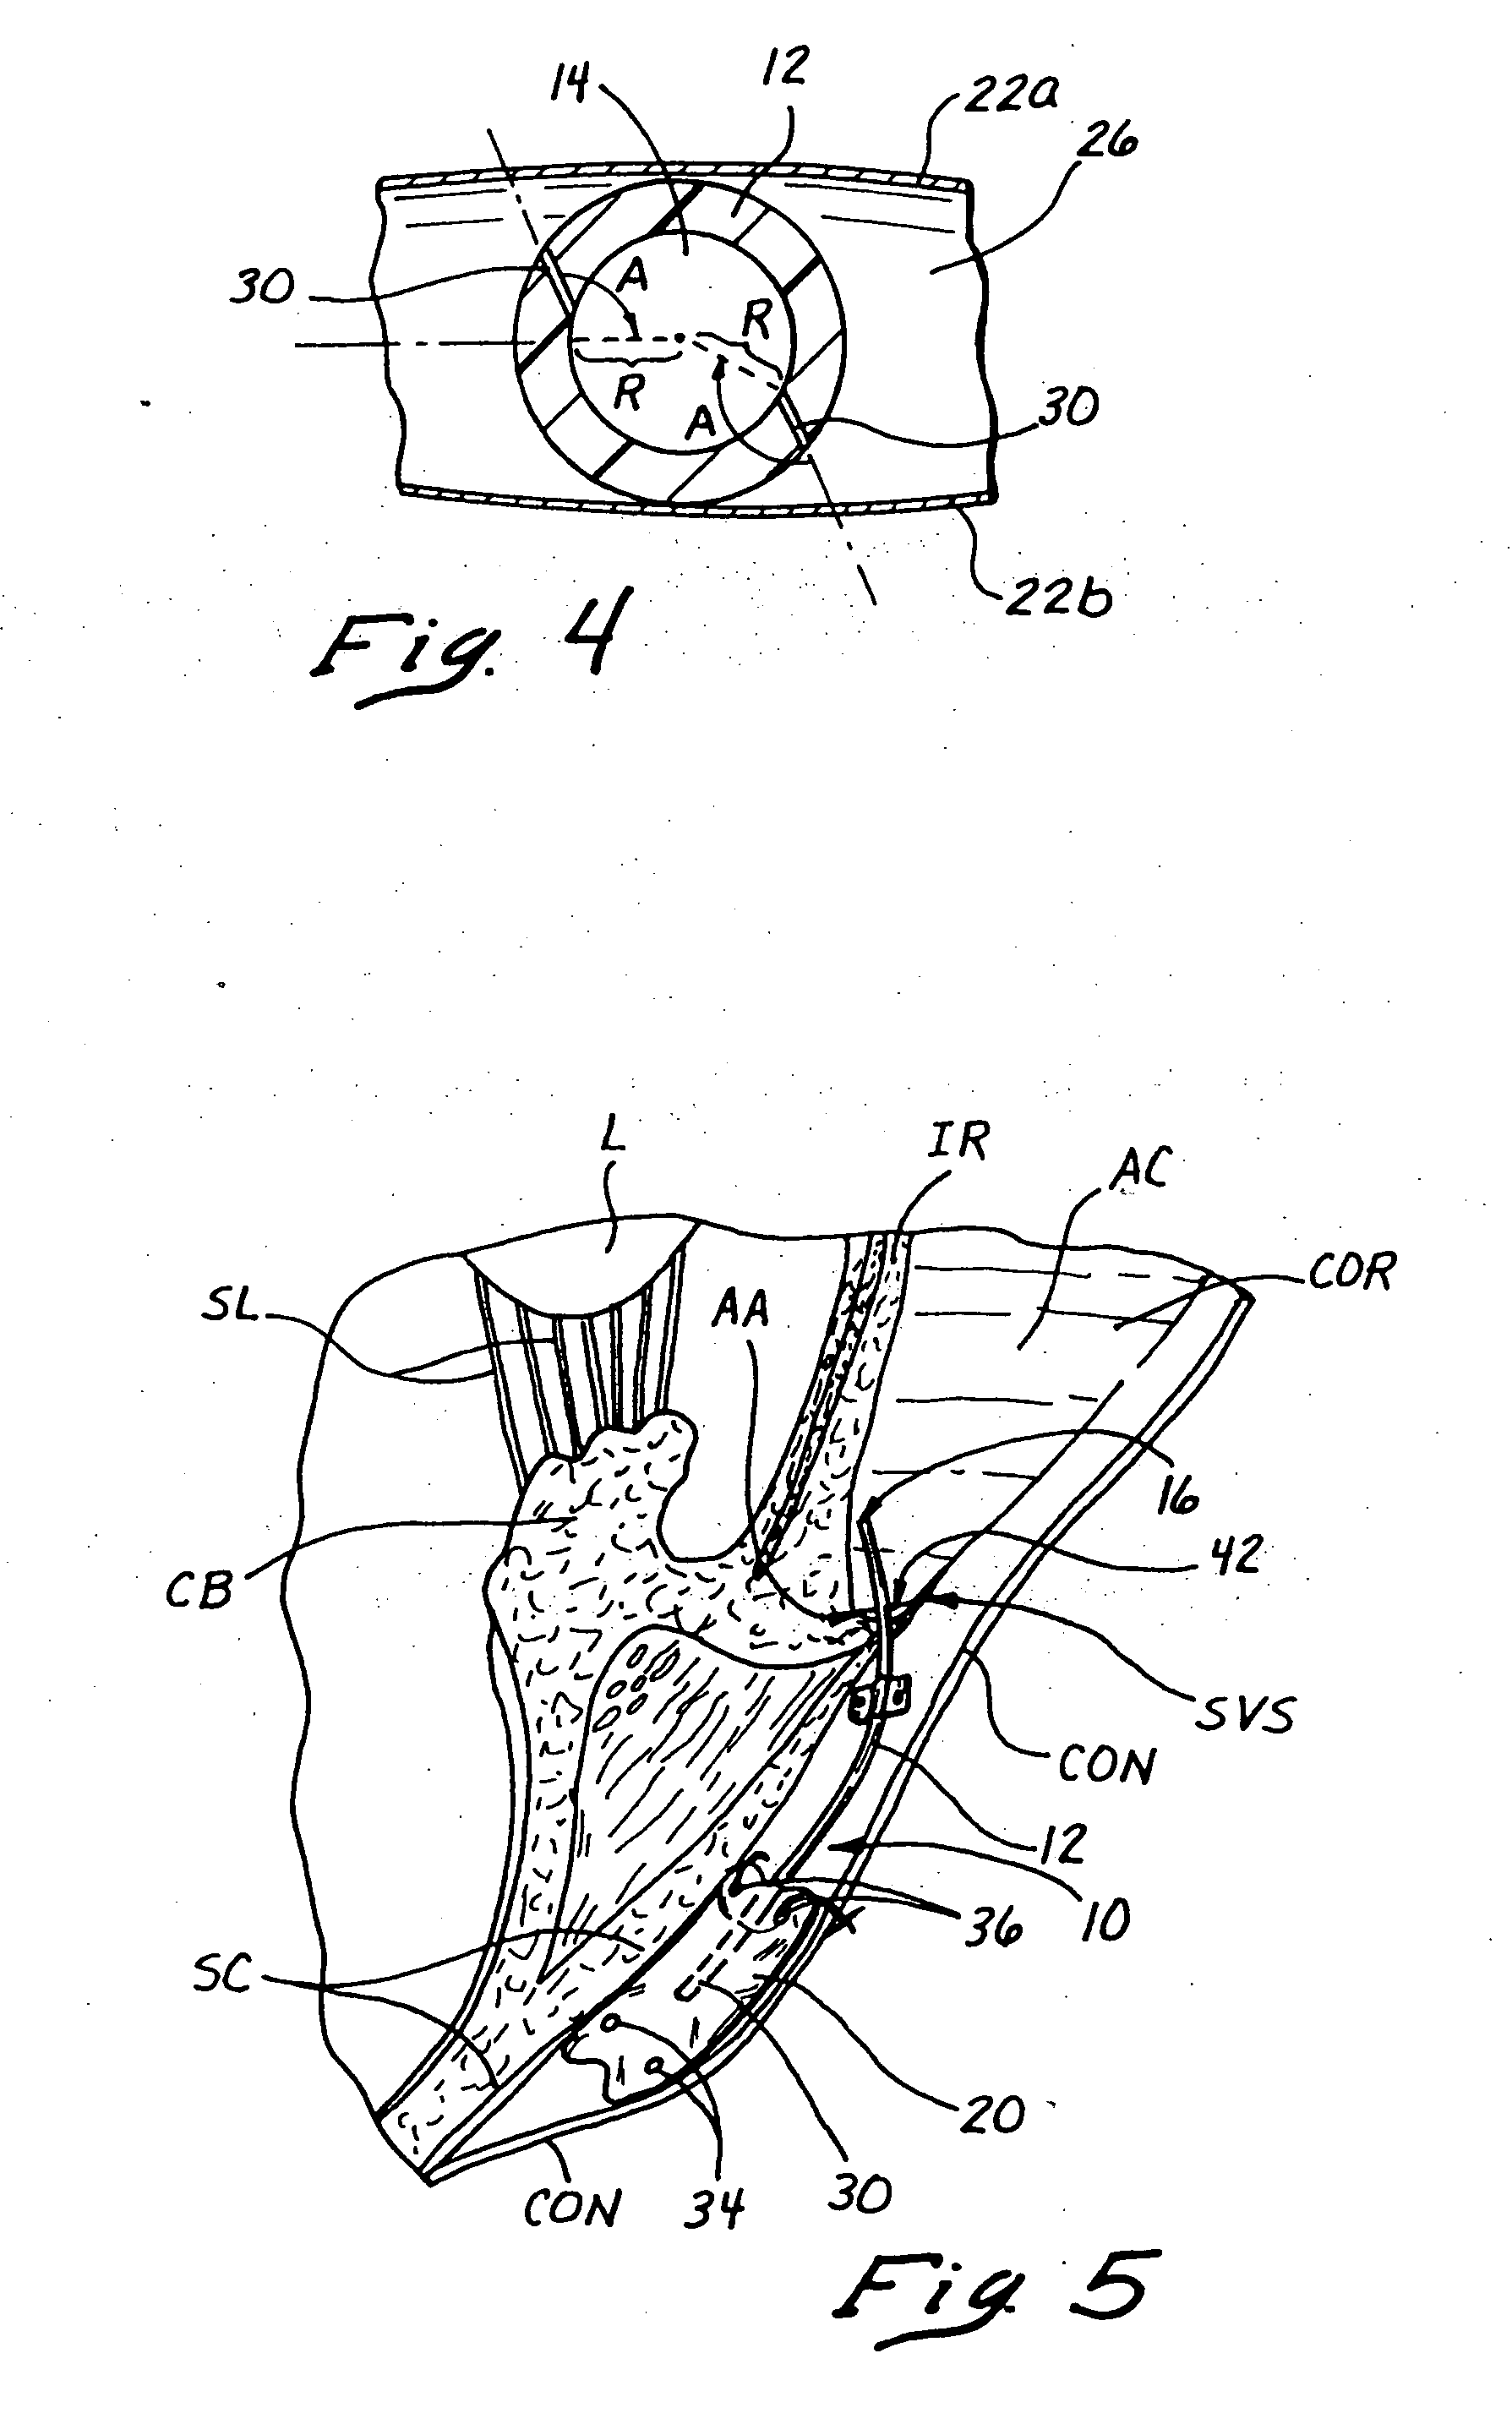 Sutureless implantable device and method for treatment of glaucoma